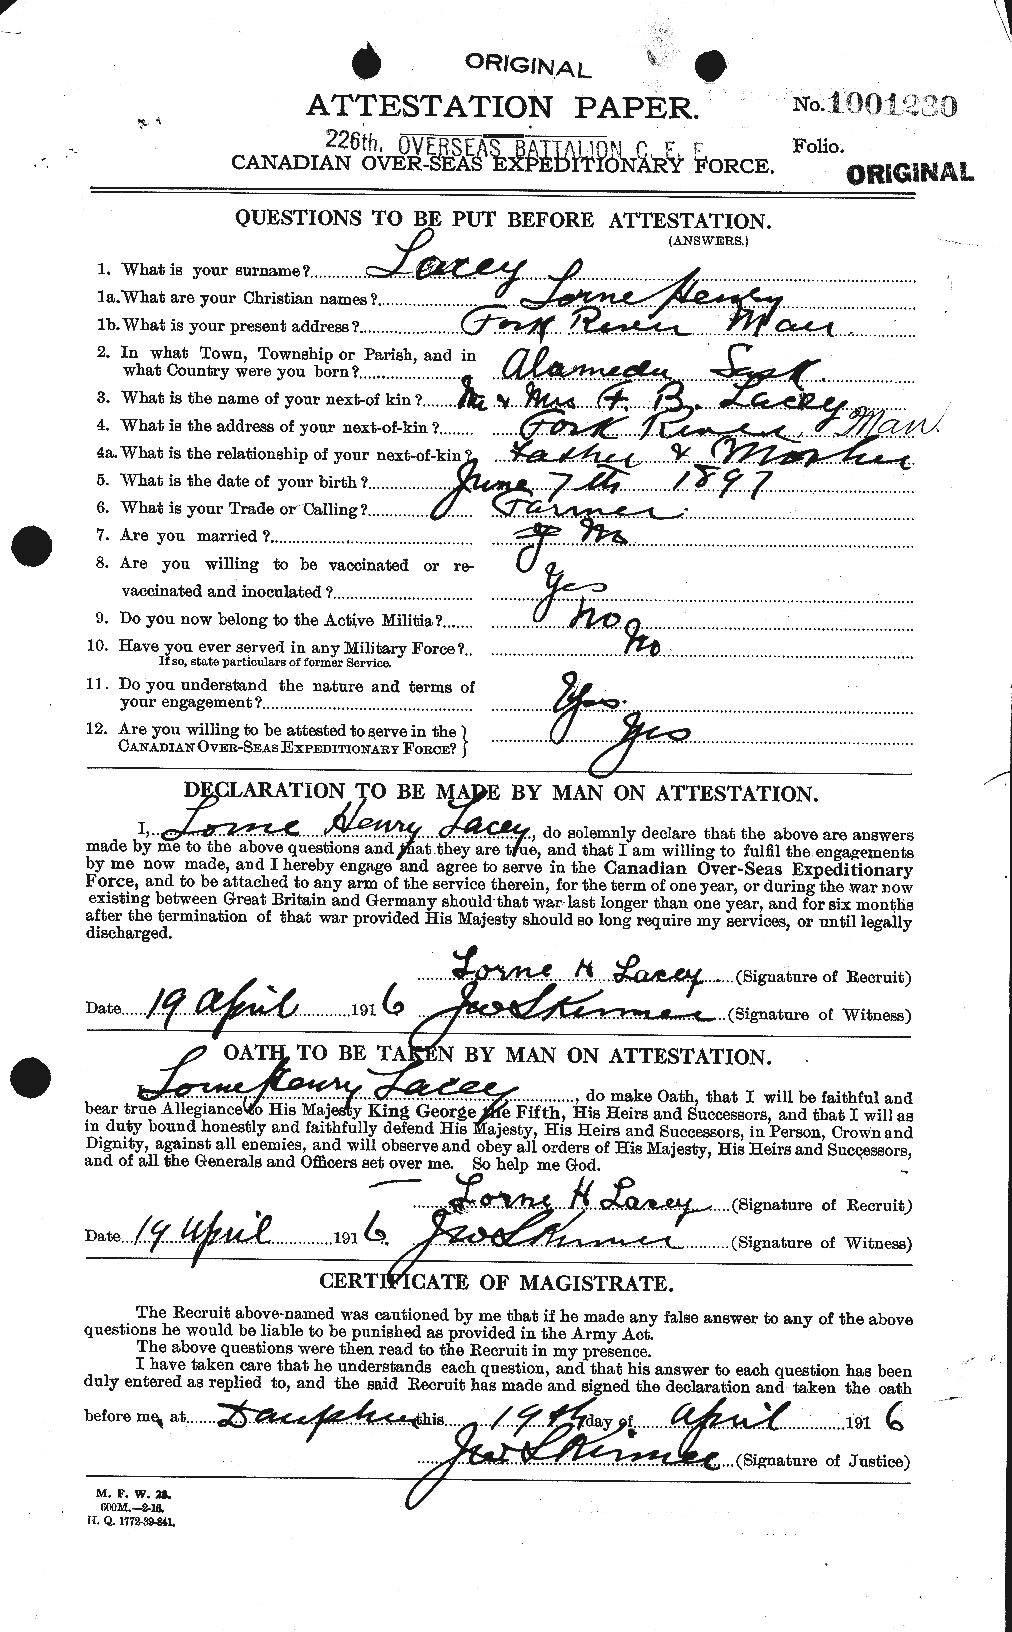 Personnel Records of the First World War - CEF 444527a